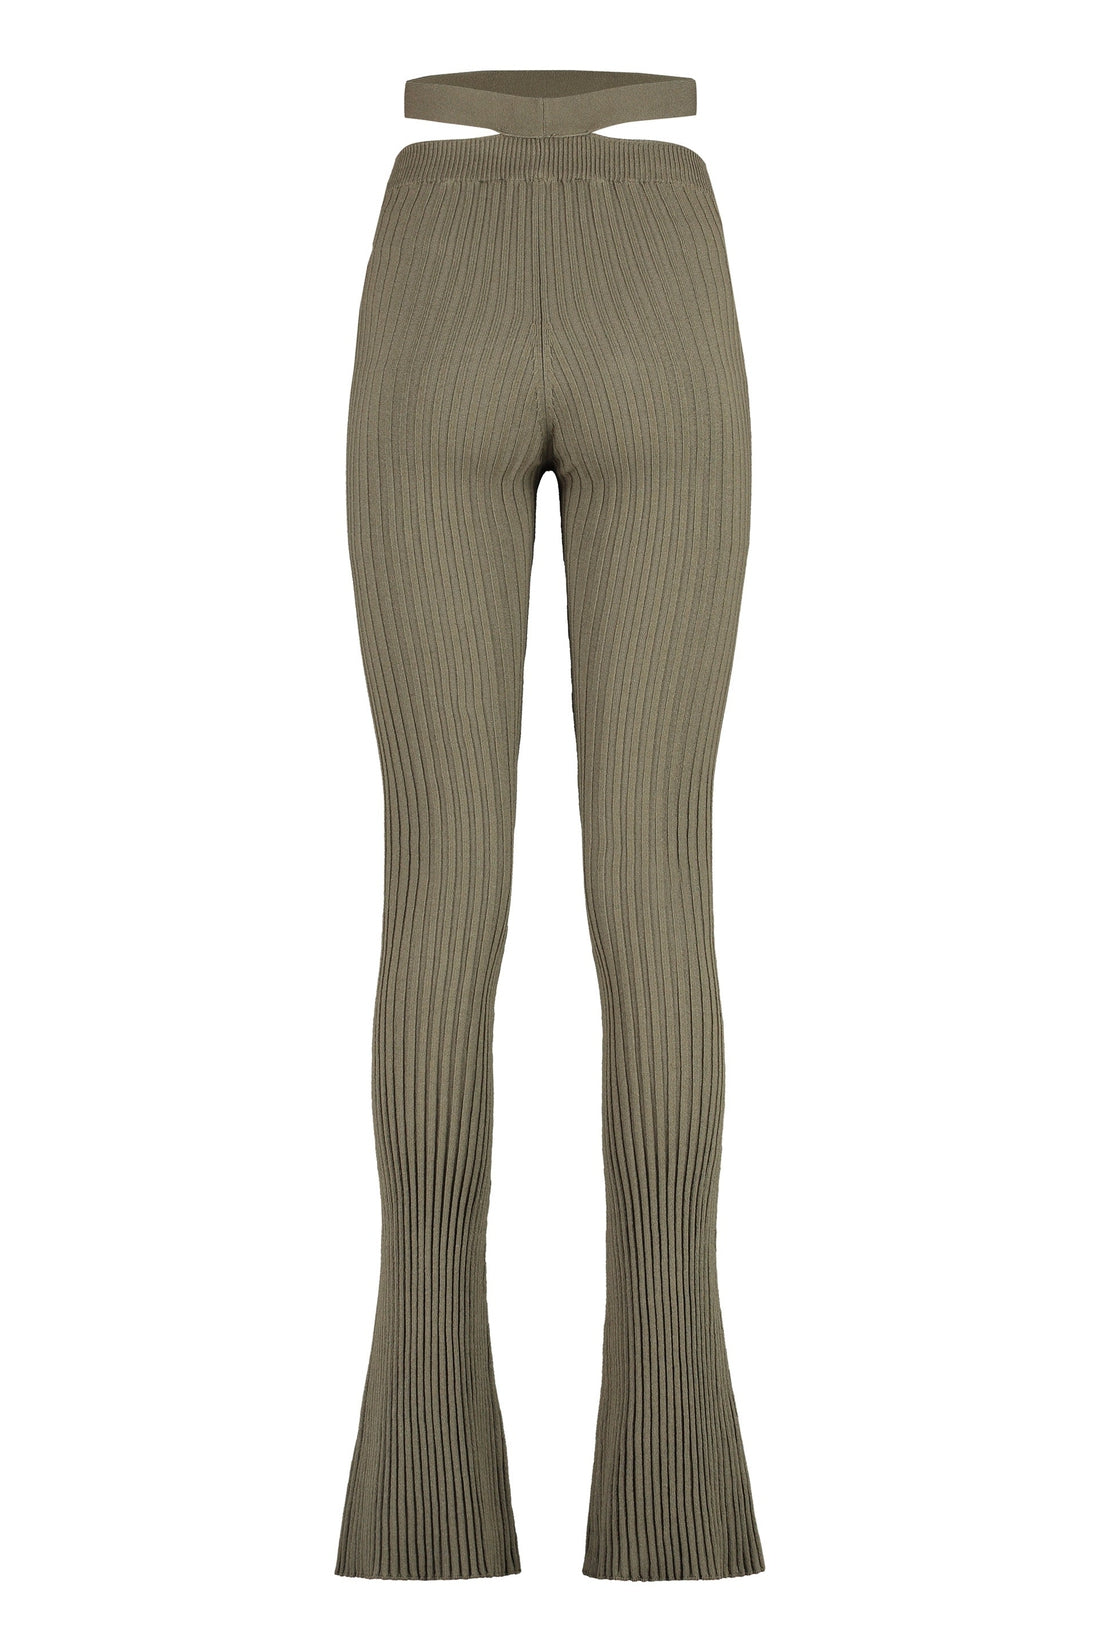 ANDREADAMO-OUTLET-SALE-Ribs knitted trousers-ARCHIVIST